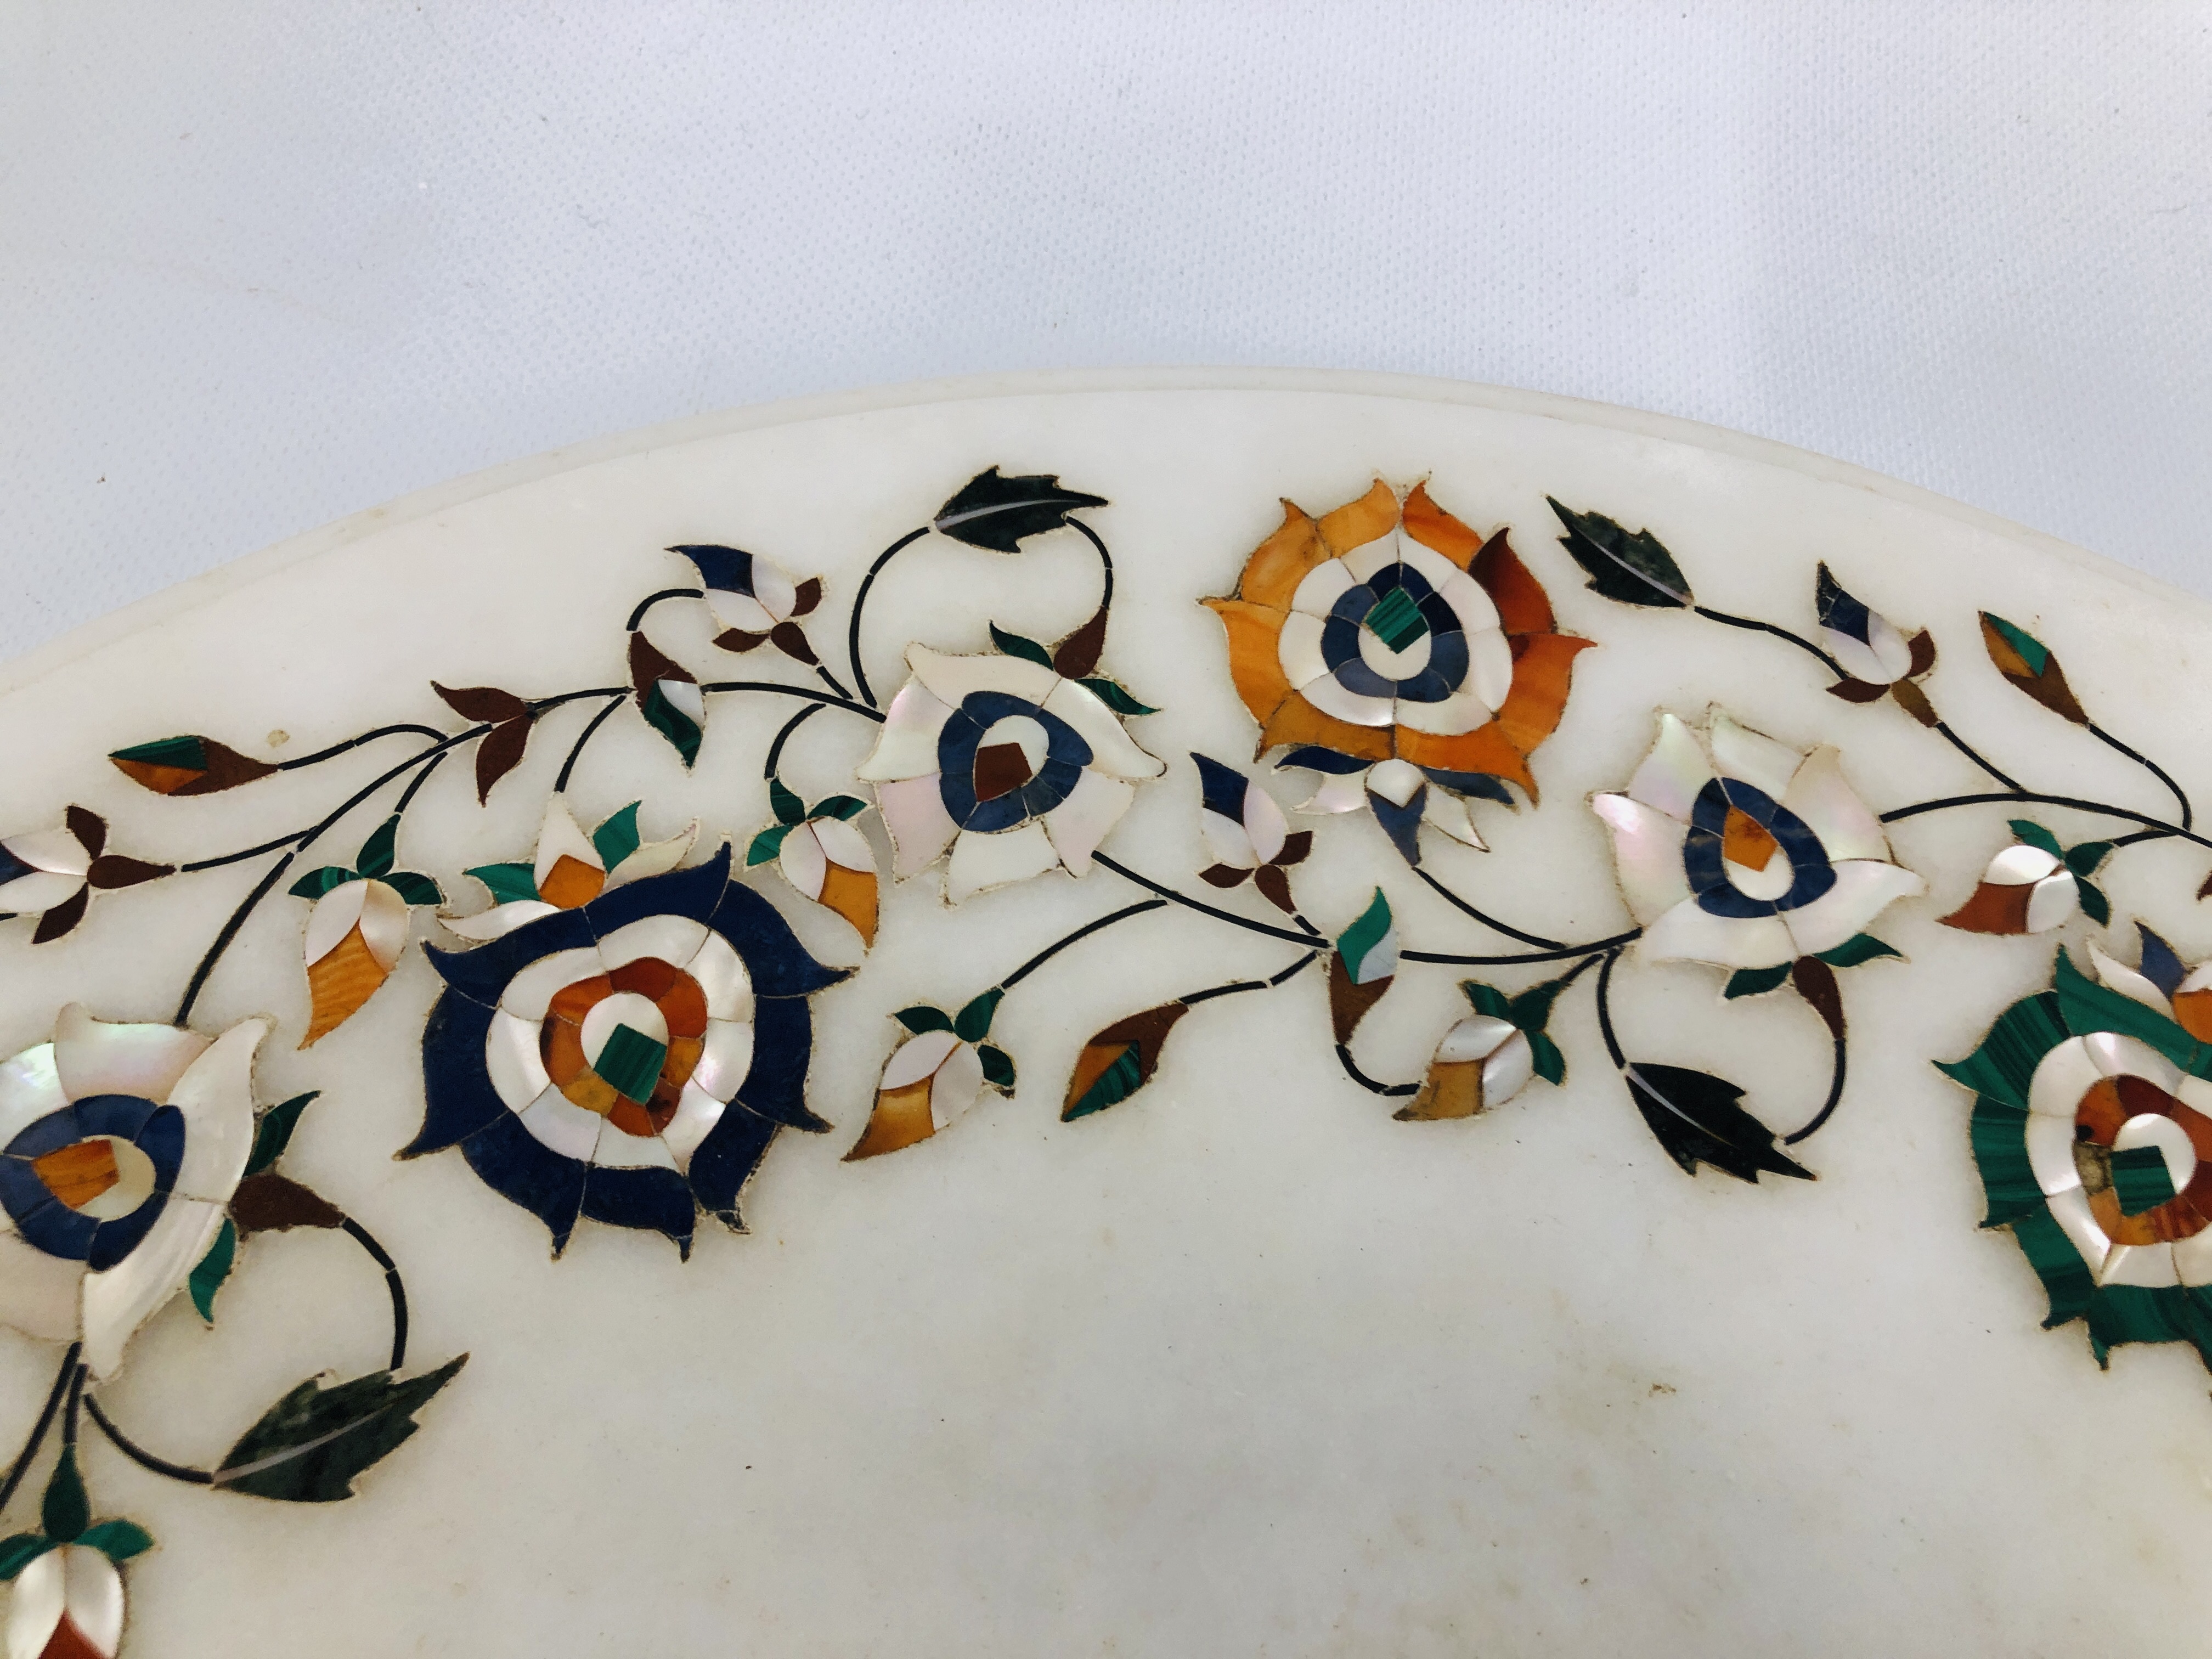 A CIRCULAR WHITE MARBLE PLATTER THE BORDER INLAID WITH A GARLAND OF POLISHED STONE AND MOTHER OF - Image 6 of 9